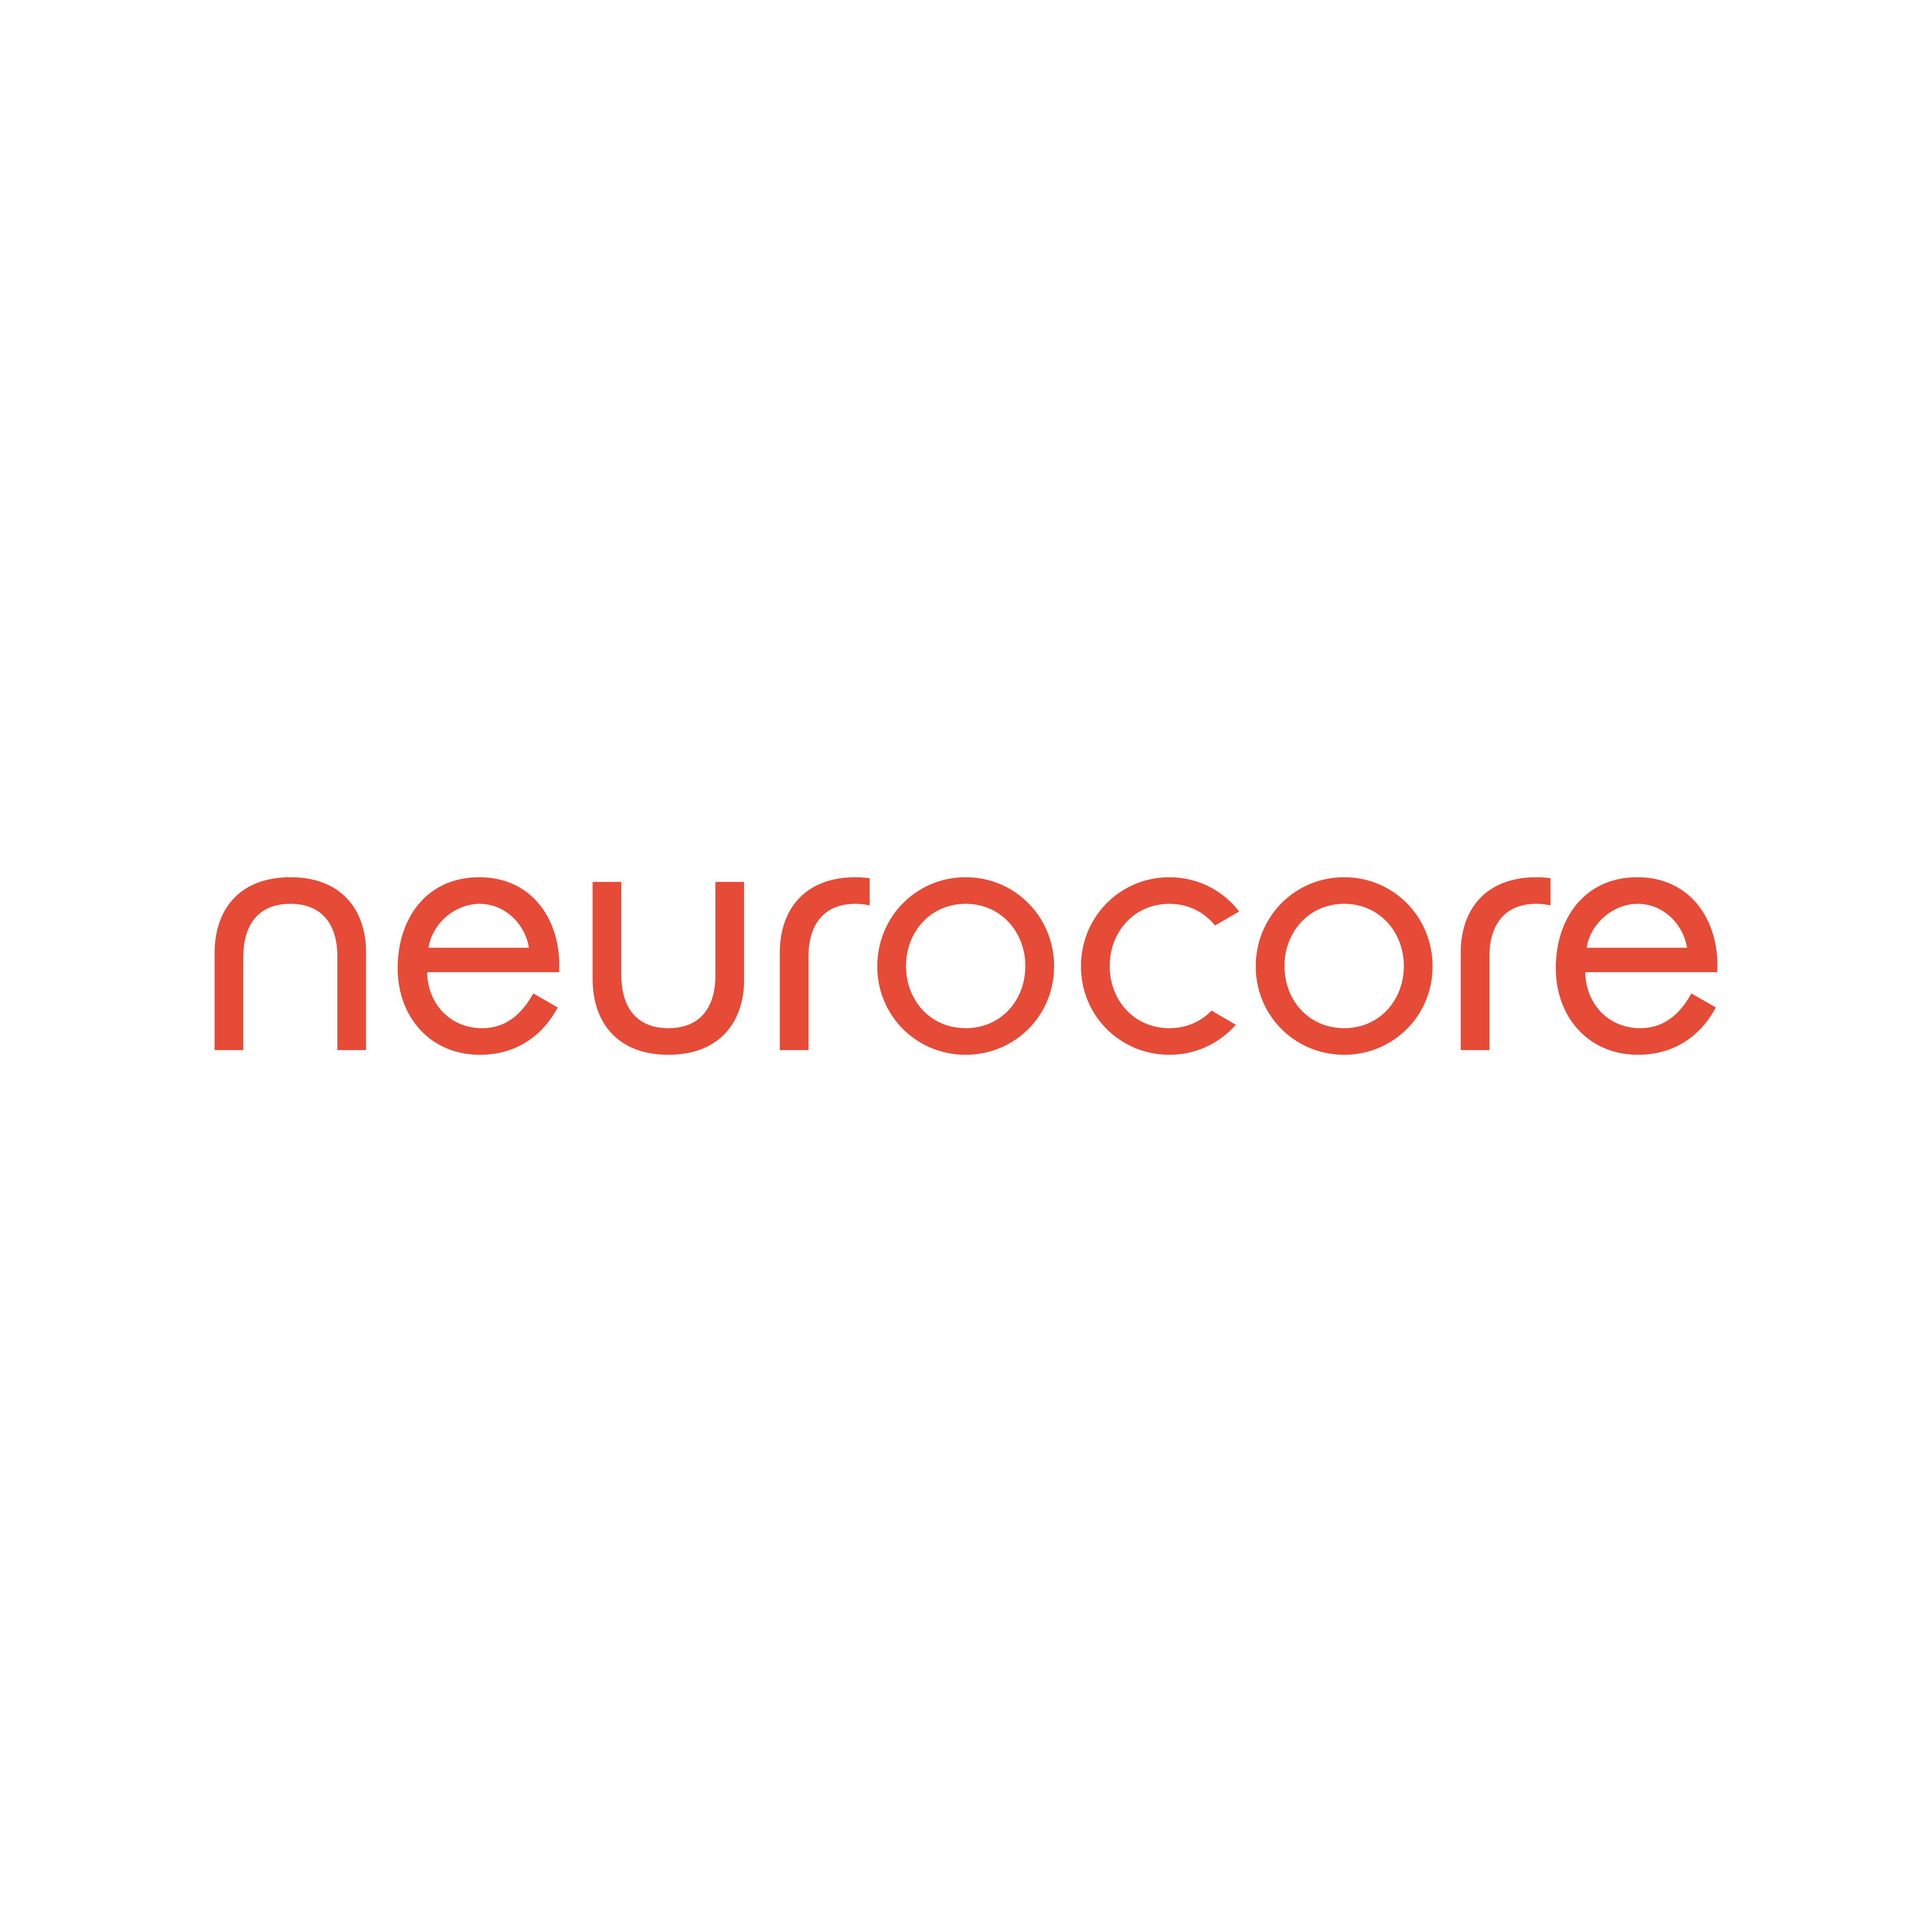 Peopledesign-neurocore logo design by logo designer Peopledesign for your inspiration and for the worlds largest logo competition